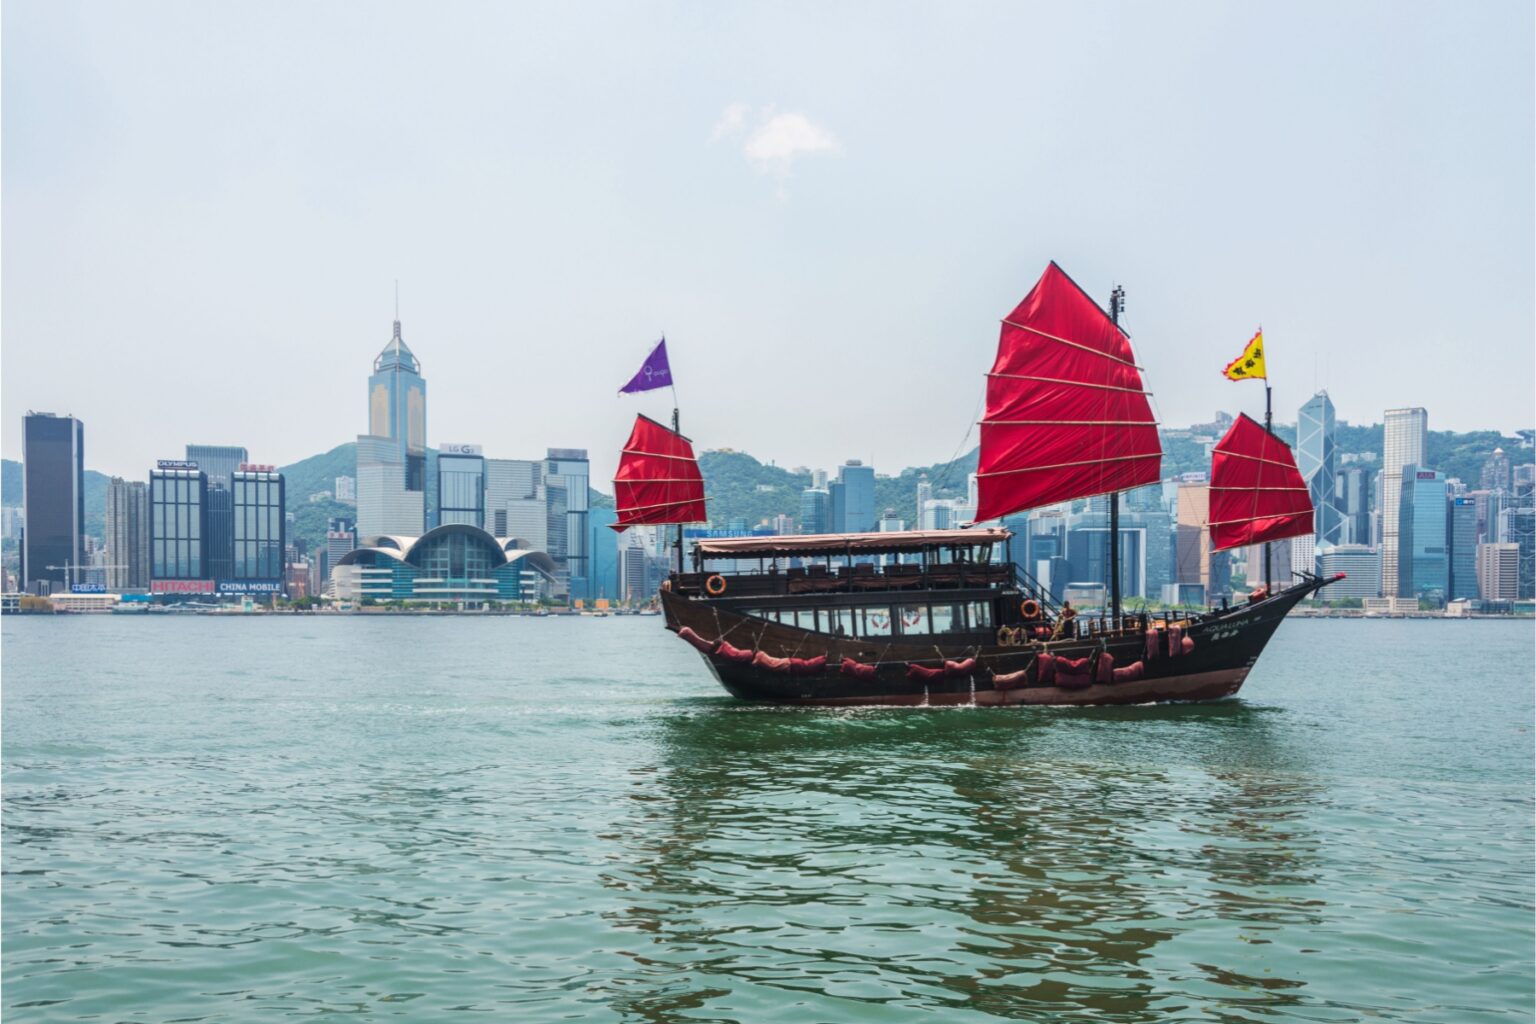 hong kong back among top 20 most visited destinations in the world